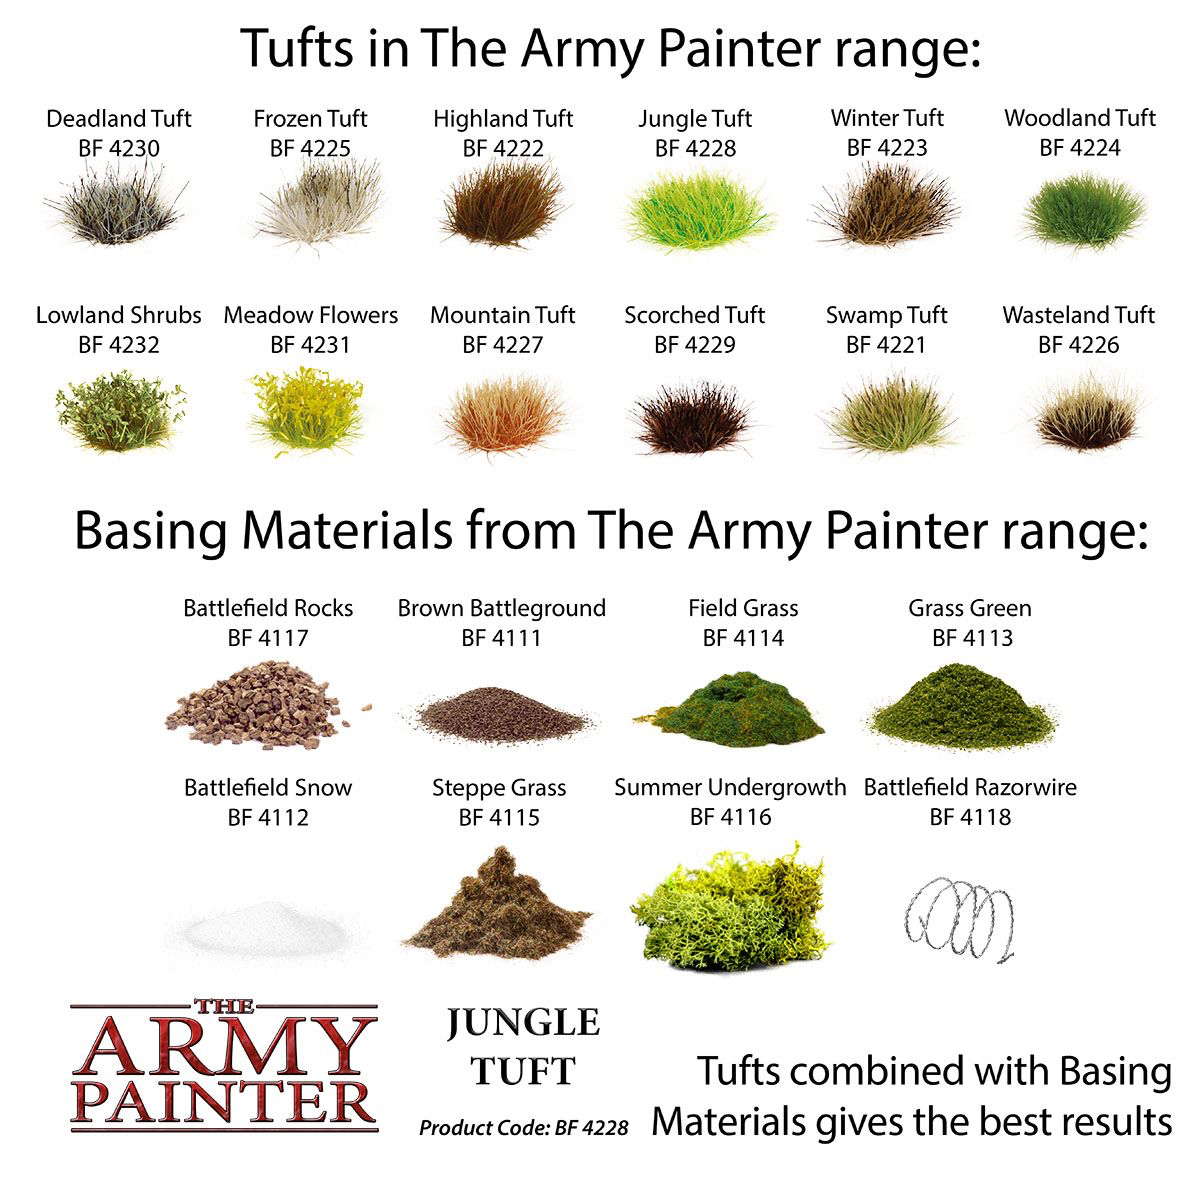 The Army Painter - Jungle Tufts